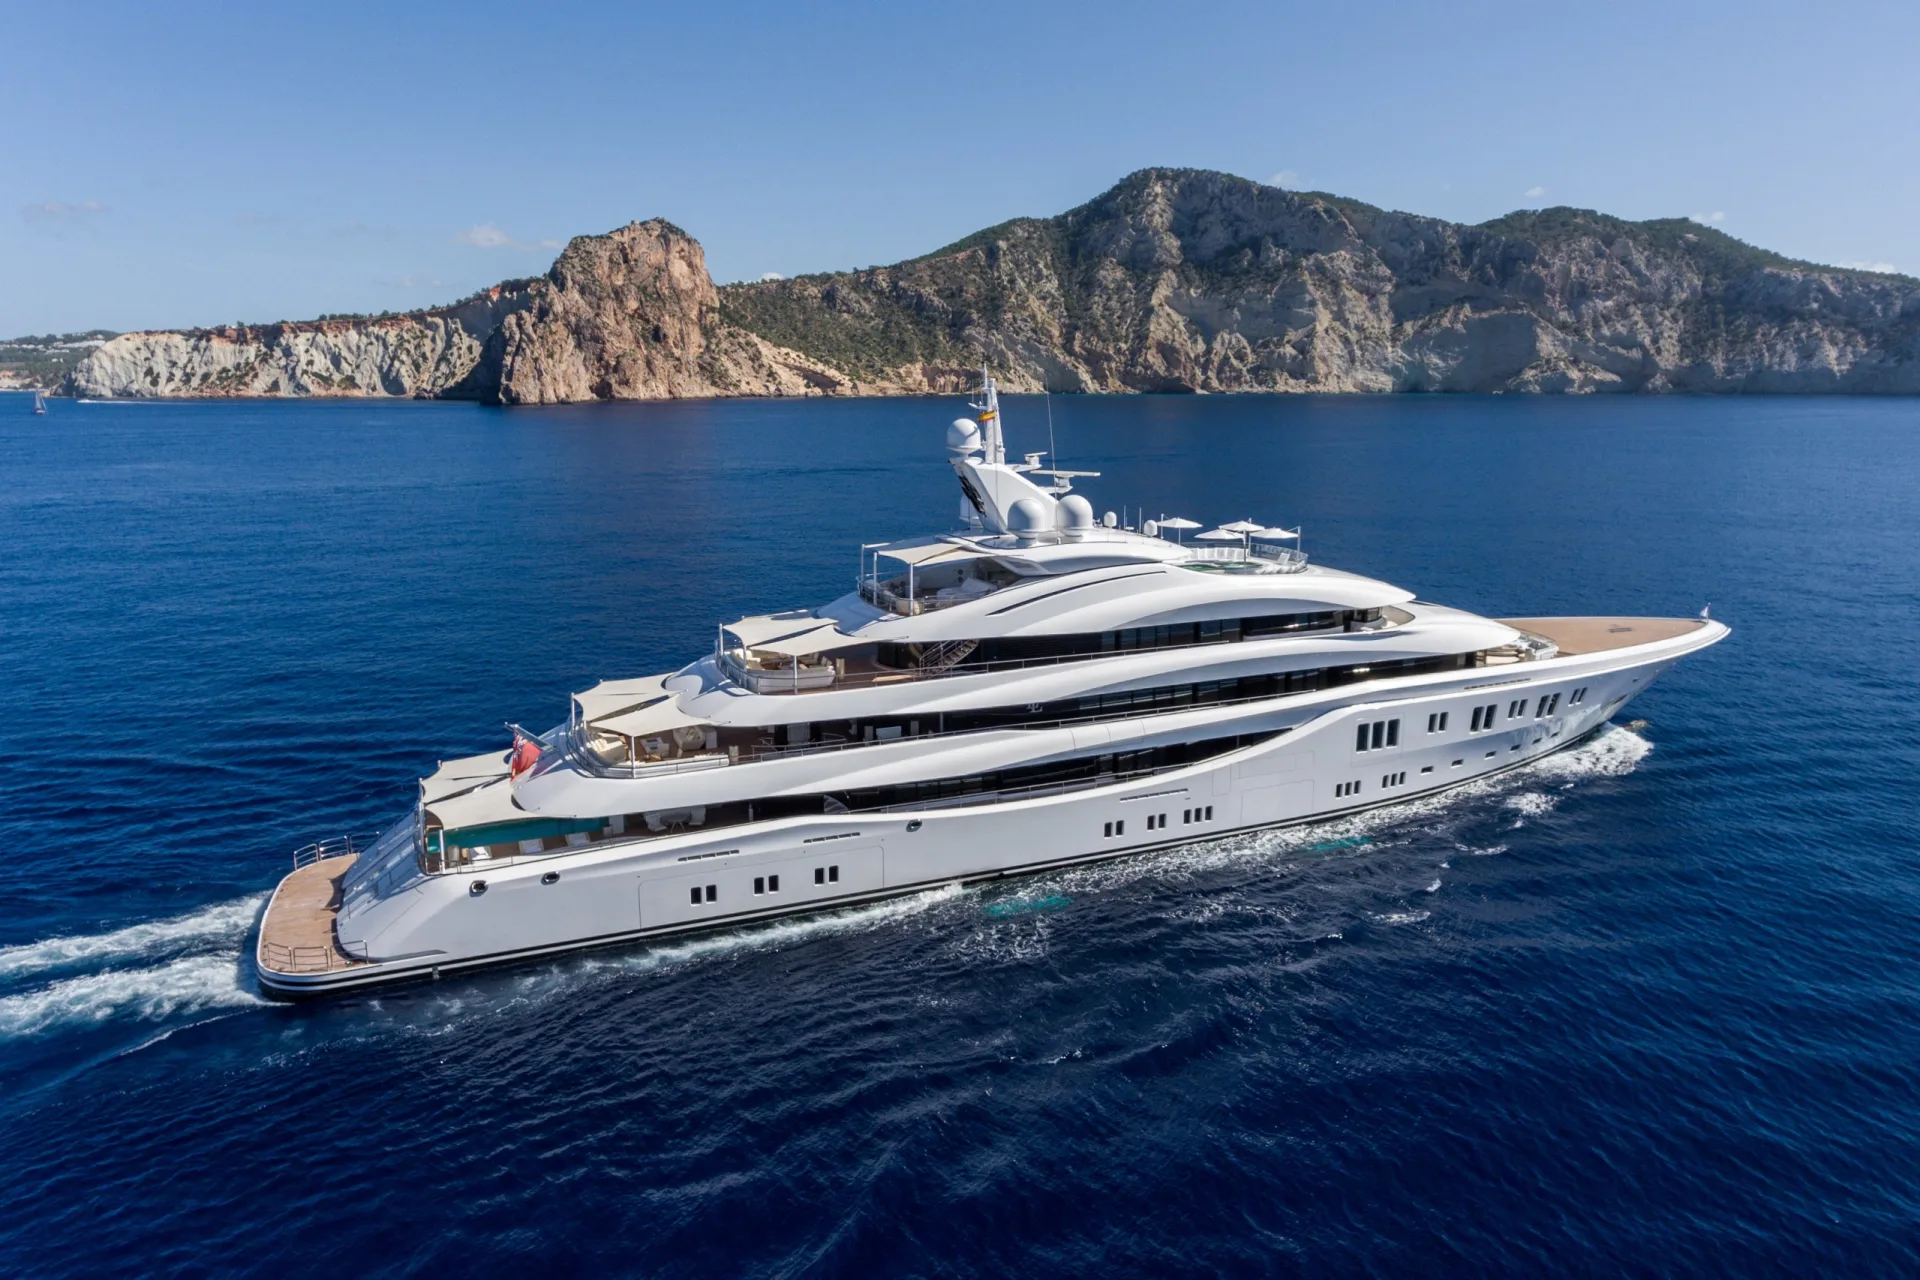 Explore the 91-meter Lady Lara superyacht by Lürssen Yachts. Priced at €230M, this luxury vessel offers unparalleled elegance, adventure, and top-tier amenities.